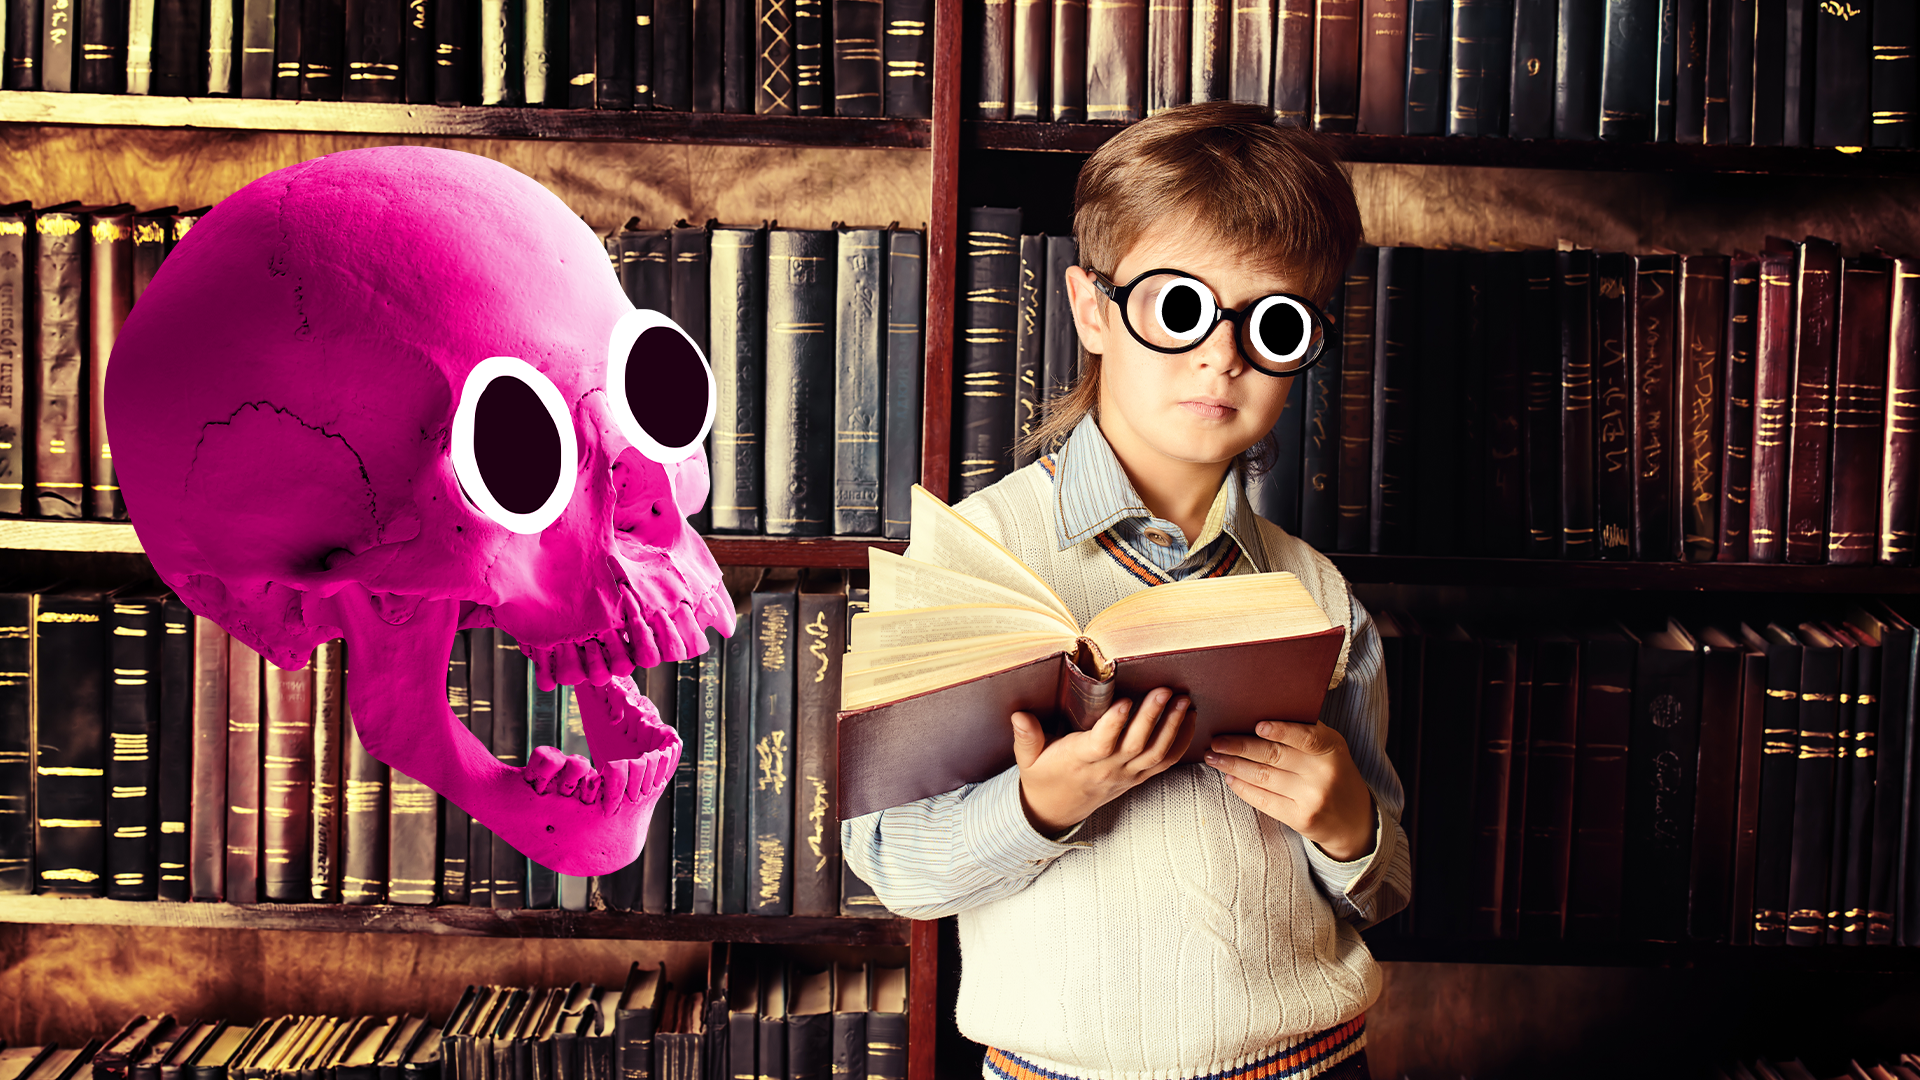 A pink skull floats near a boy in an old library